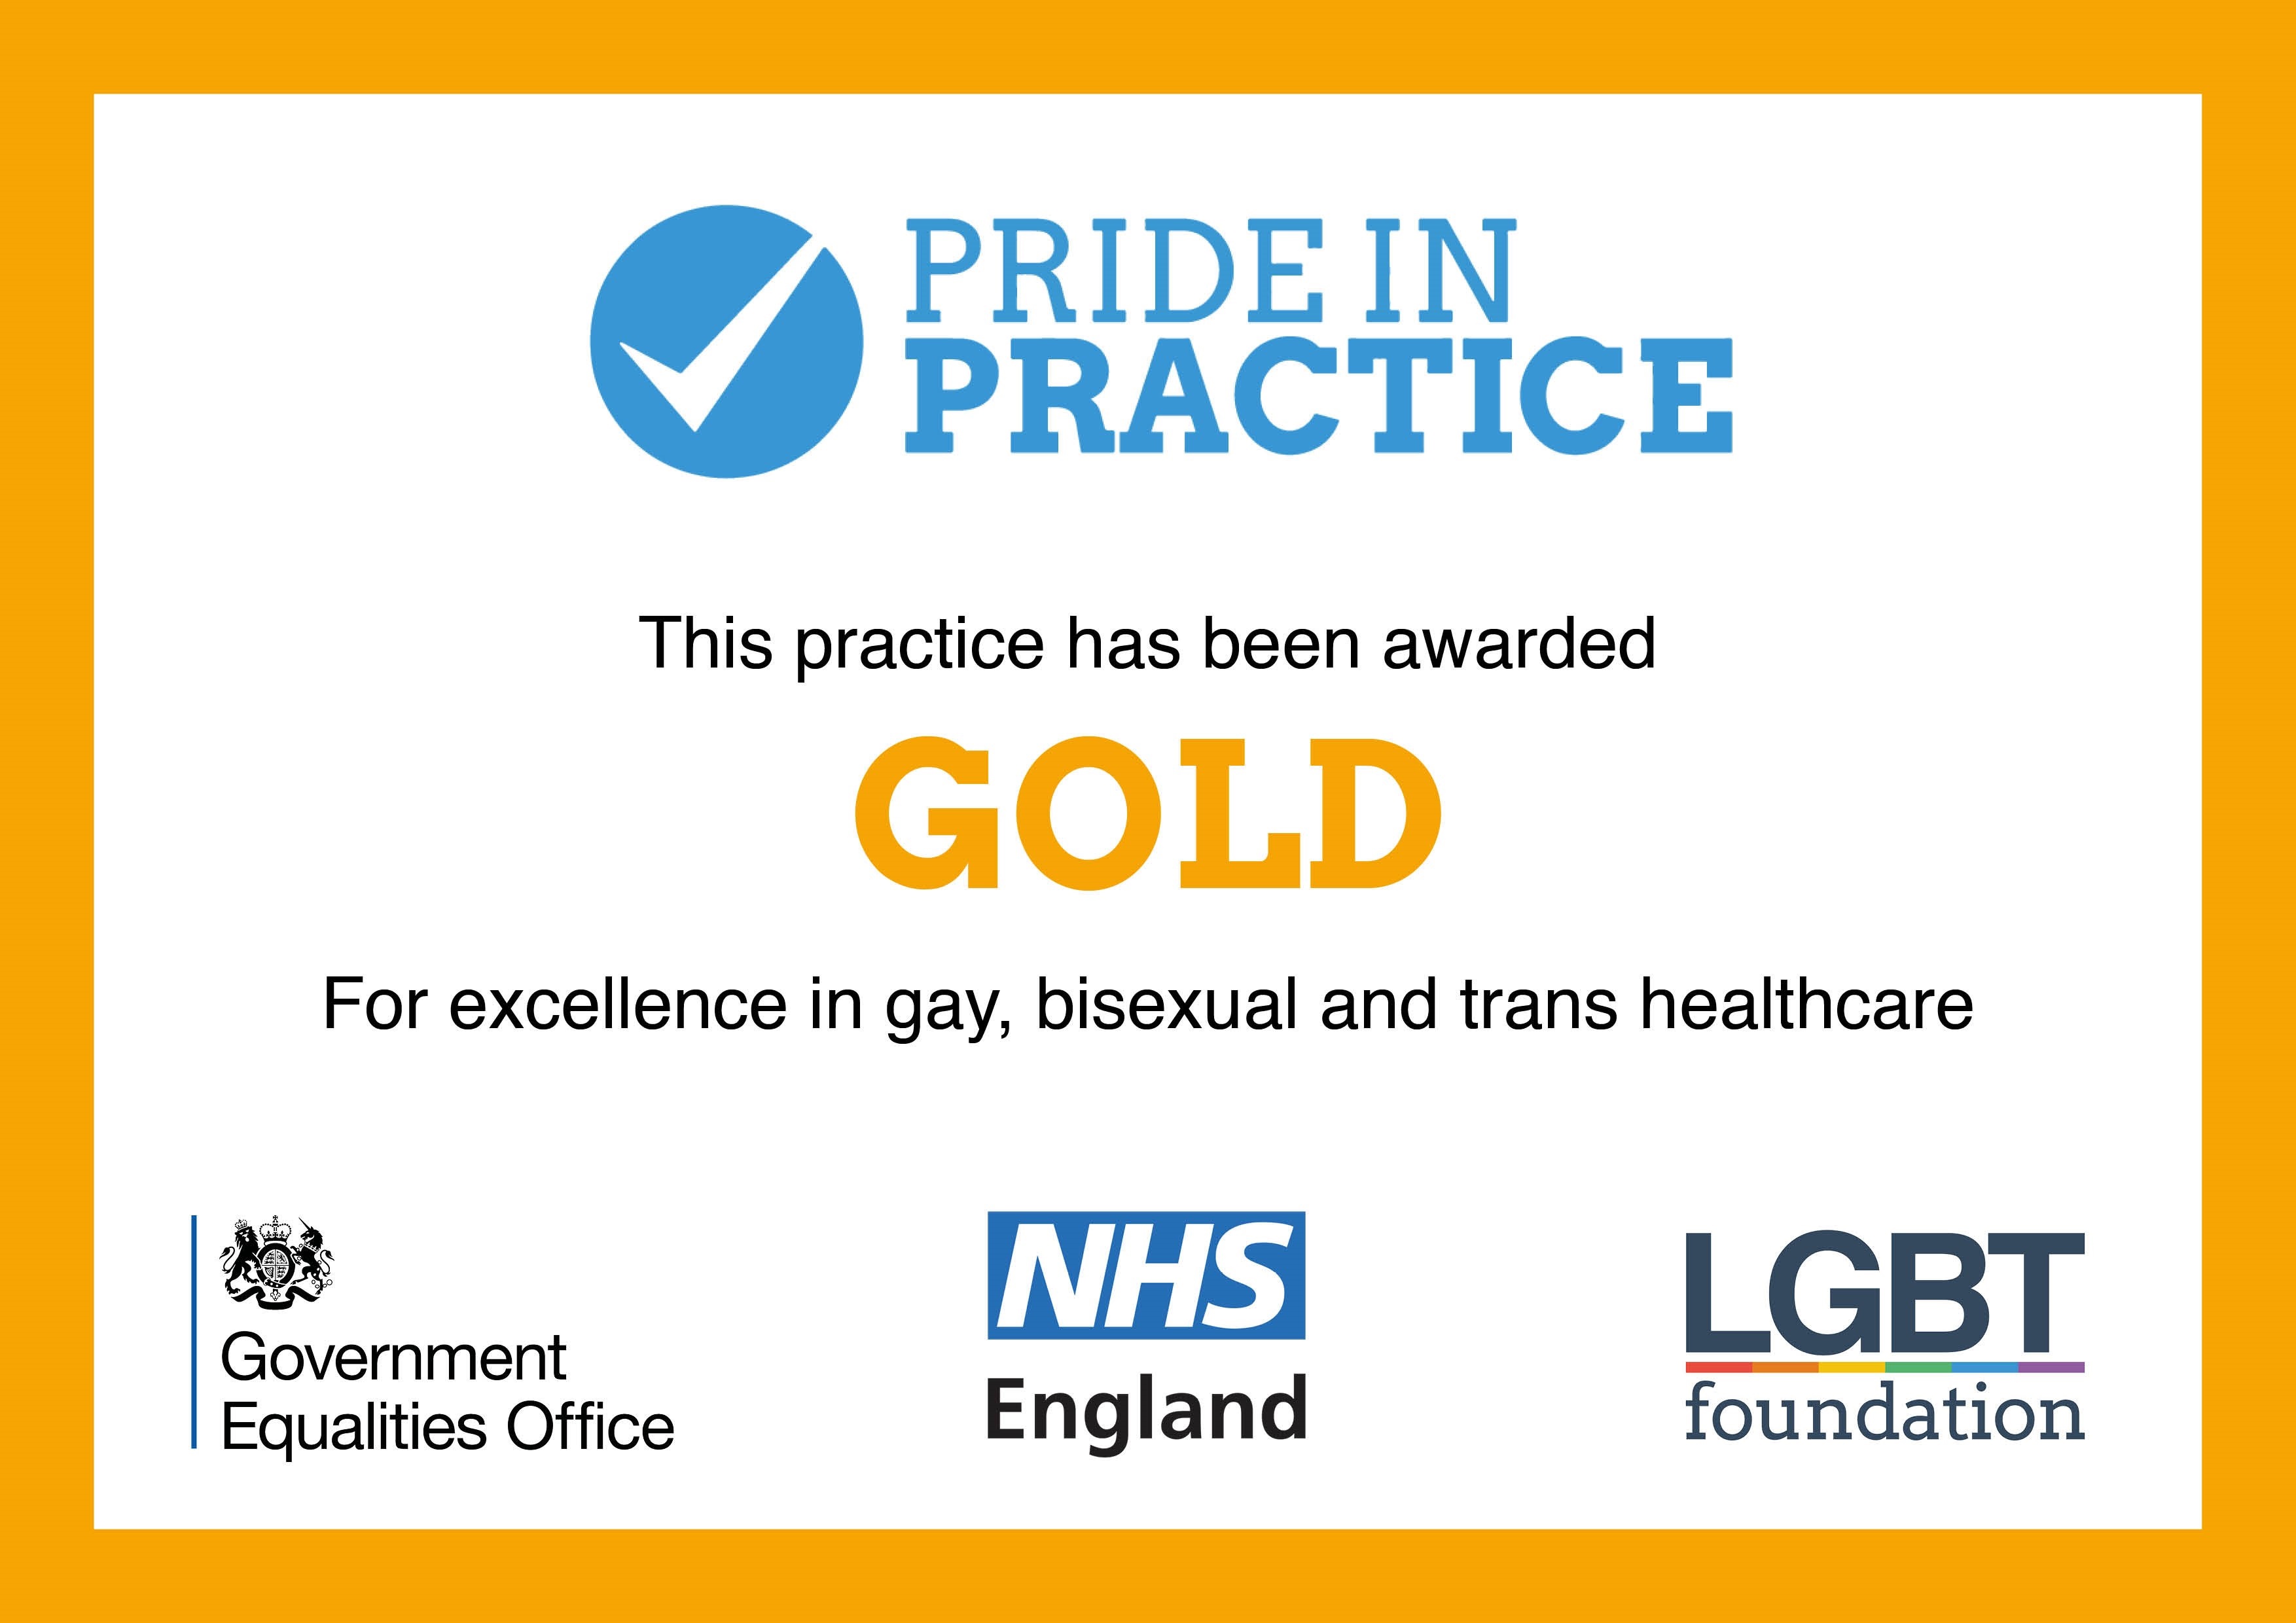 Pride in practice. This practice has been awarded Gold for excellence in gay, bisexual and trans healthcare